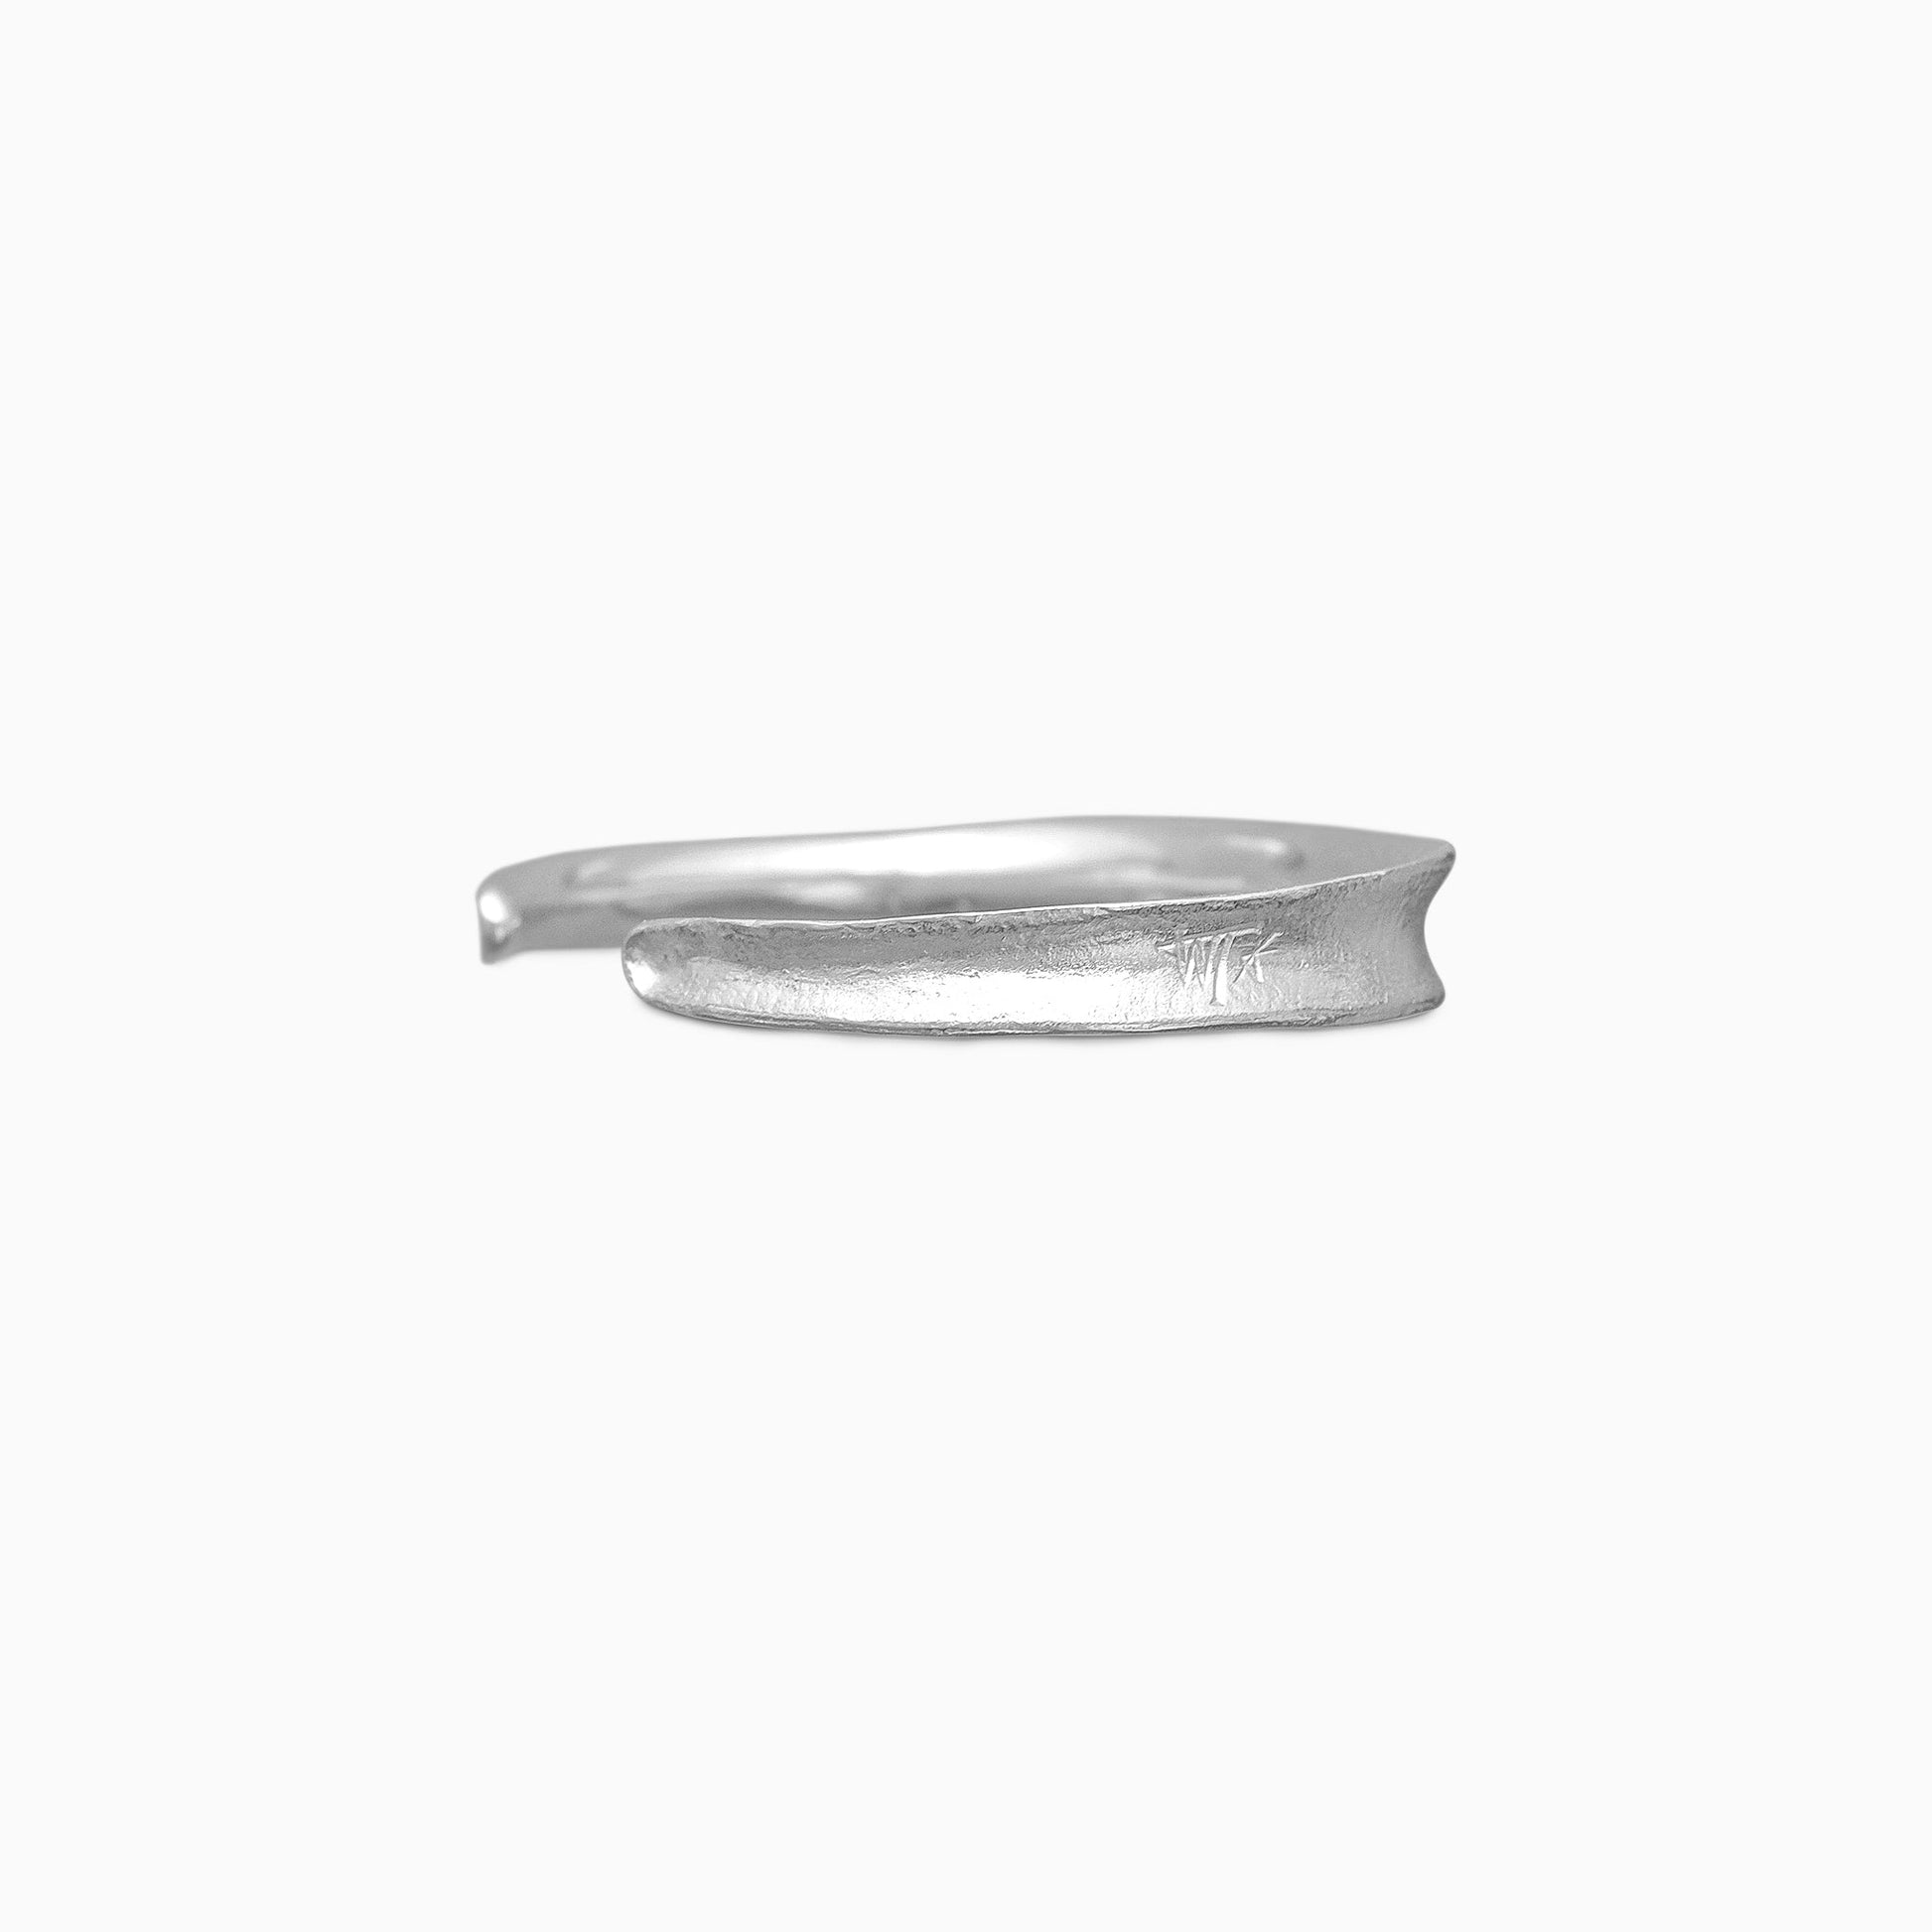 A recycled Silver Cuff bangle fitting close to wrist. Concave and textured. Open ended to get on and off. Width 8mm. Inside oval diameter 58mm. 